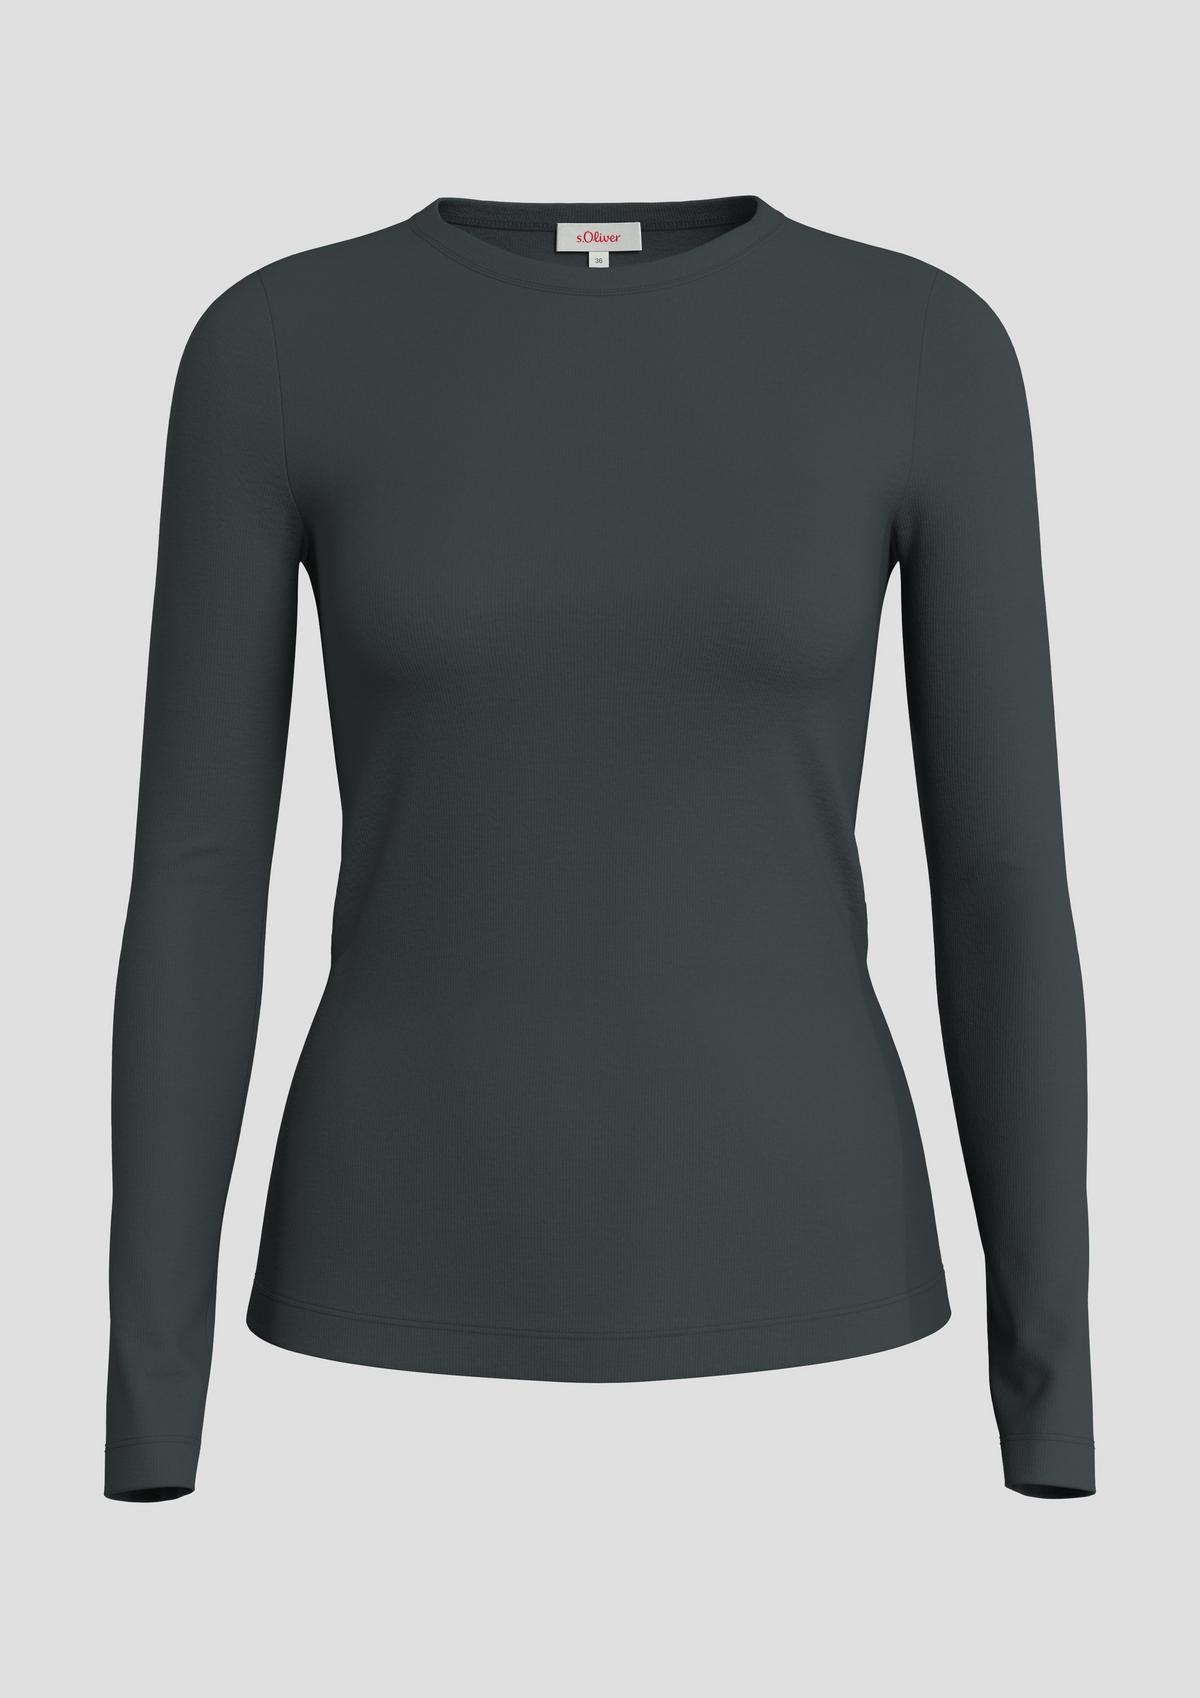 s.Oliver Jersey long sleeve top in a slim fit